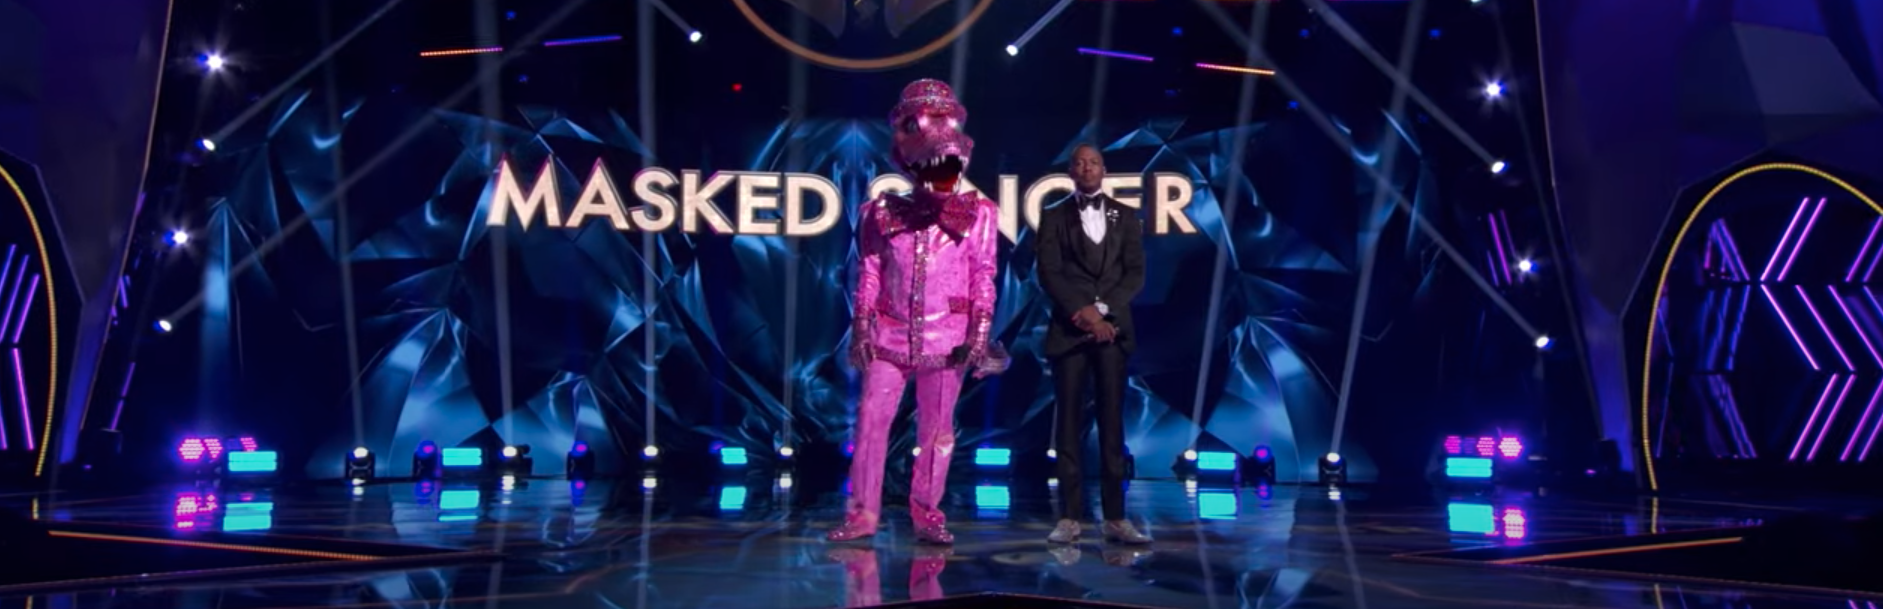 The Masked Singer on Fox